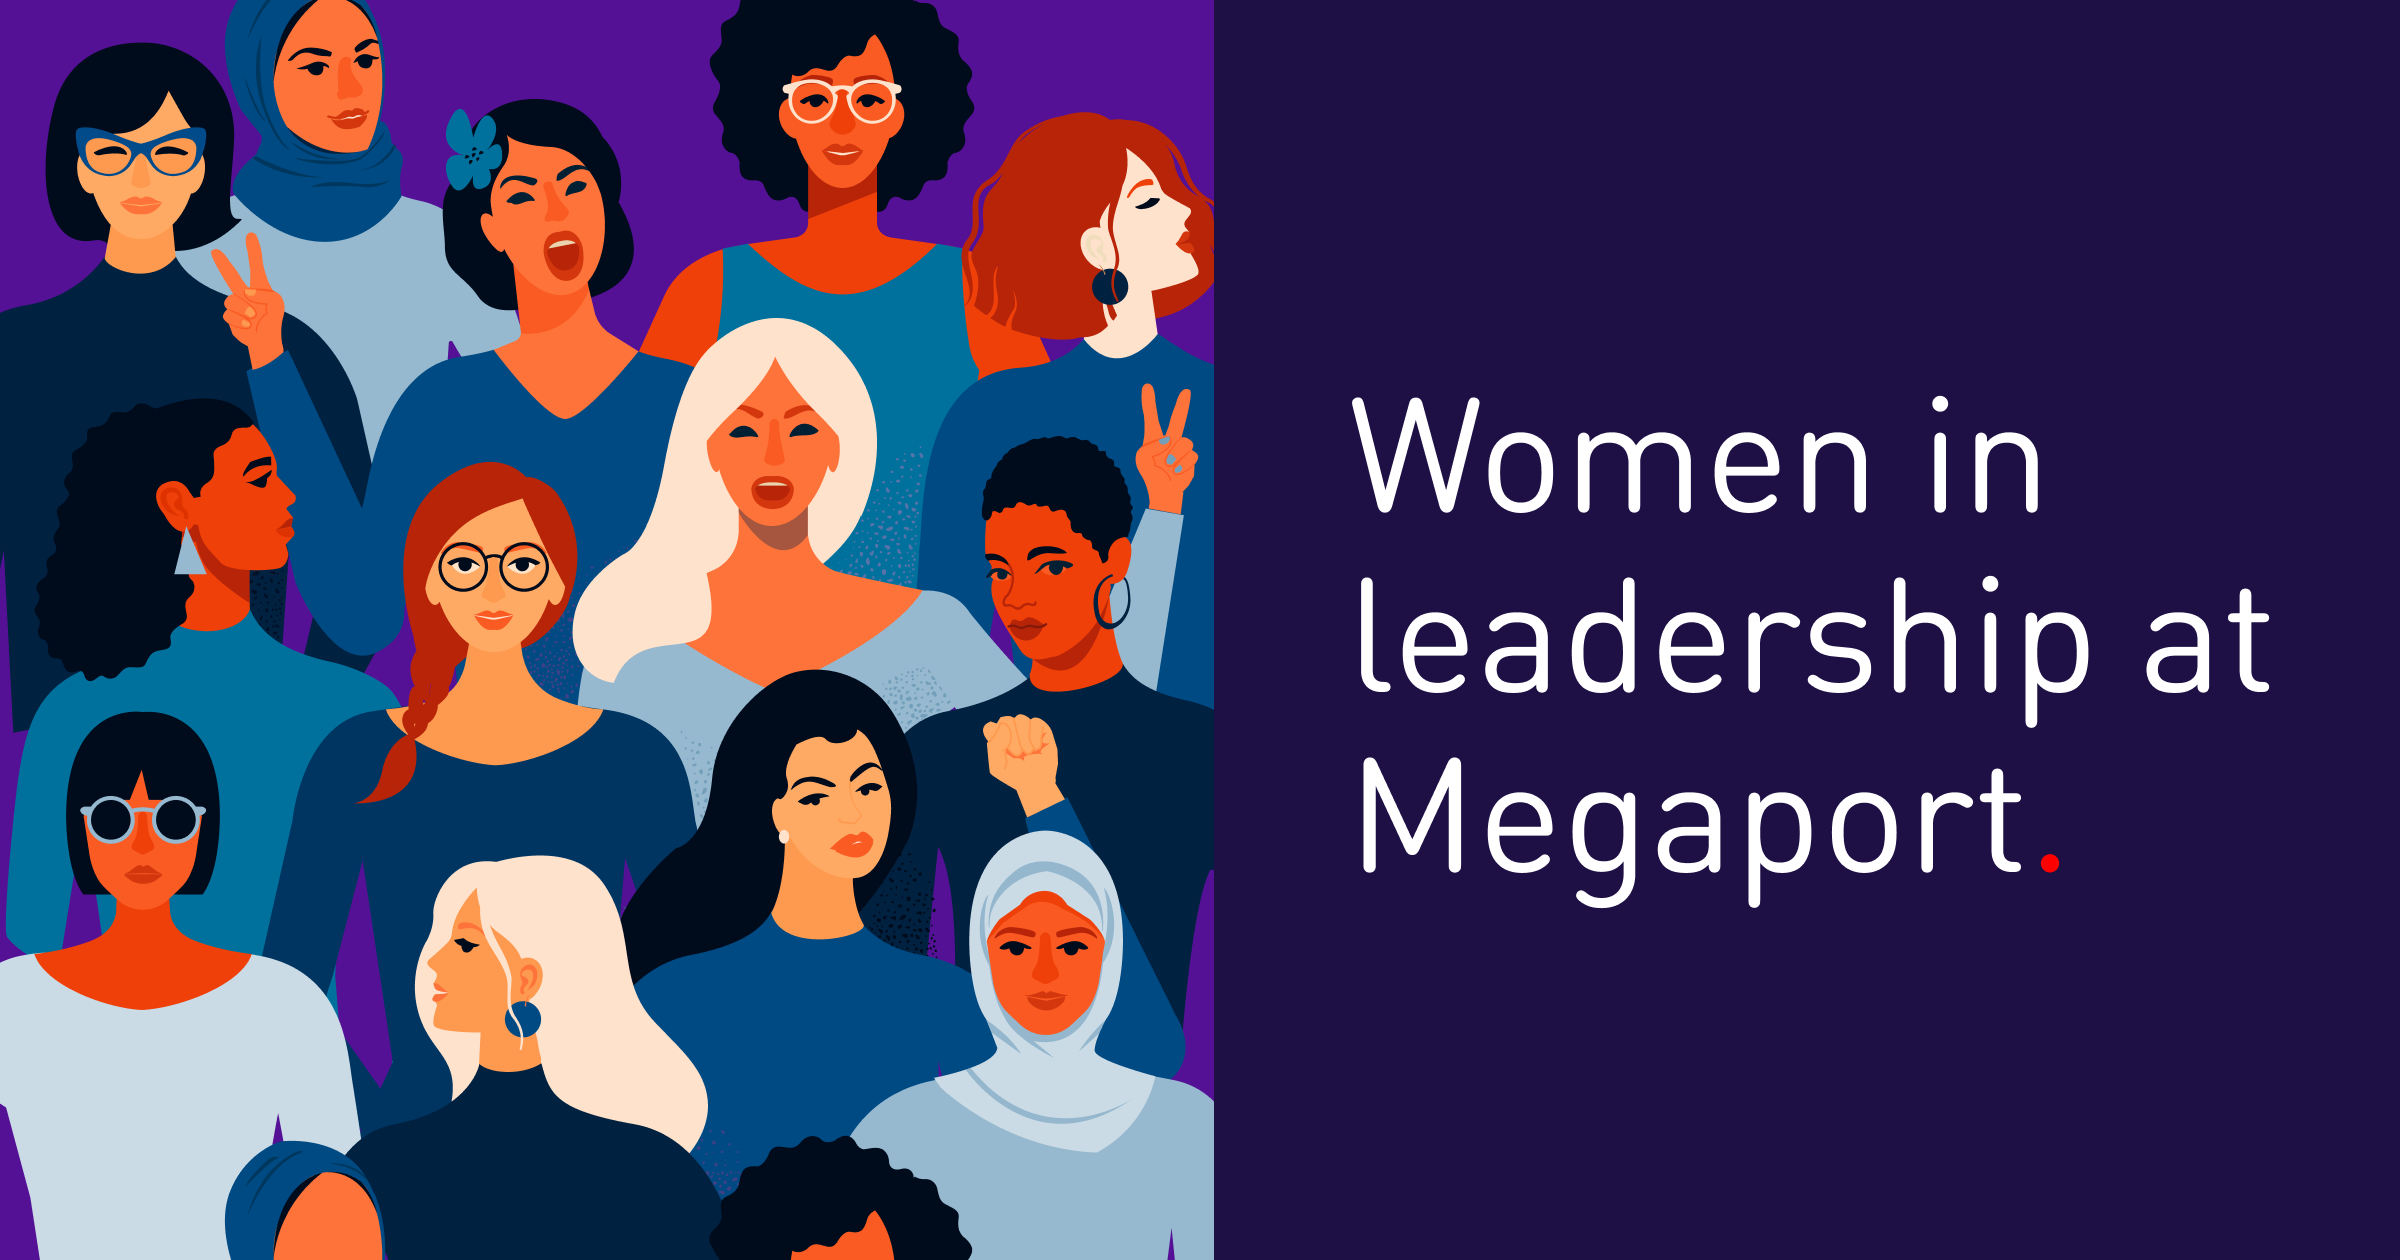 Women in leadership rise through learning and development at Megaport